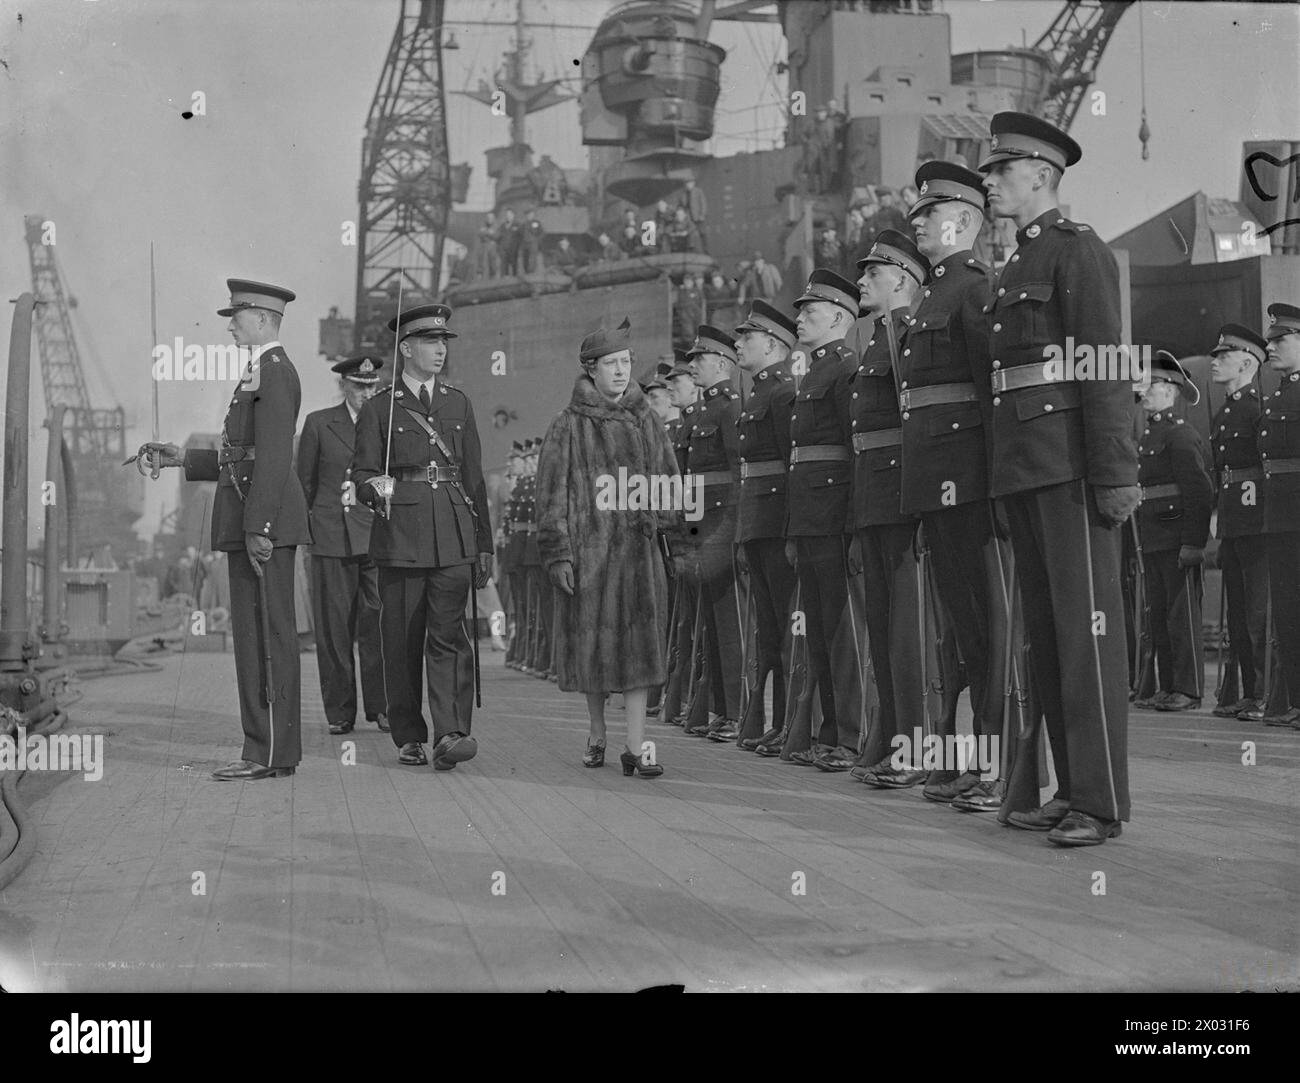 HRH THE PRINCESS ROYAL VISITS ROSYTH AND INSPECTS HMS PRINCE OF WALES. 1941. - The Princess Royal inspecting a Guard of Honour of Royal Marines during her visit to Rosyth Stock Photo